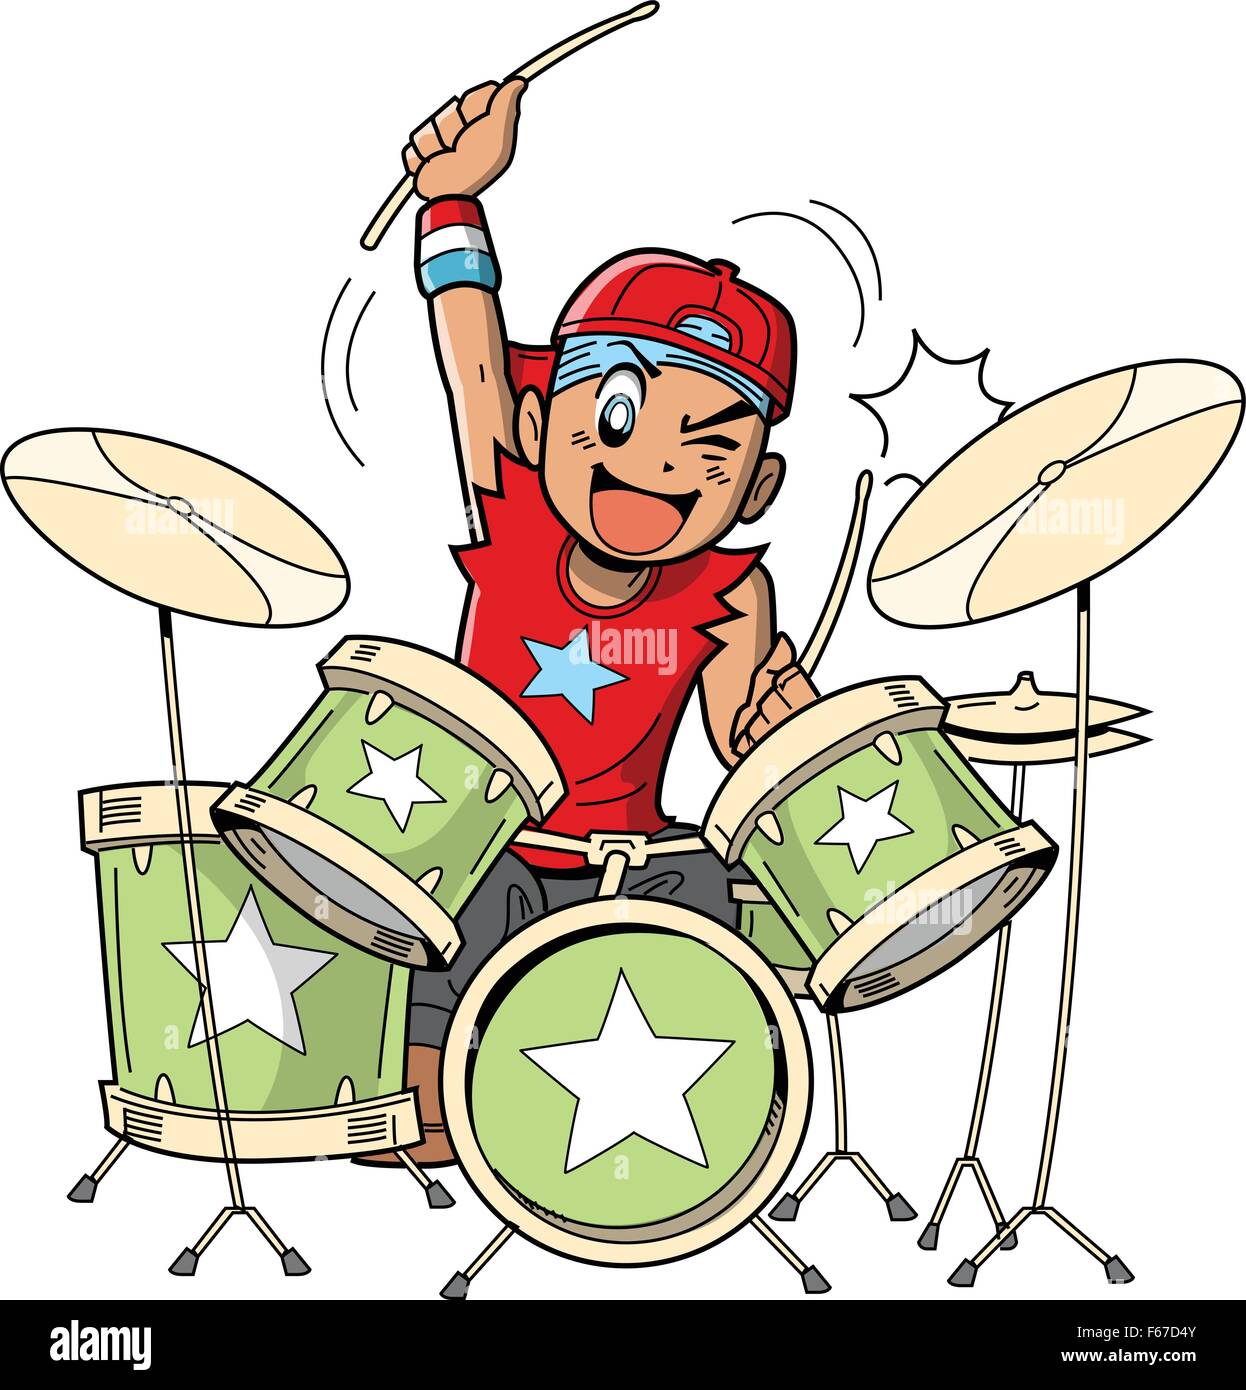 Fun anime and manga style cartoon drummer rocks out when he's playing drums Stock Vector